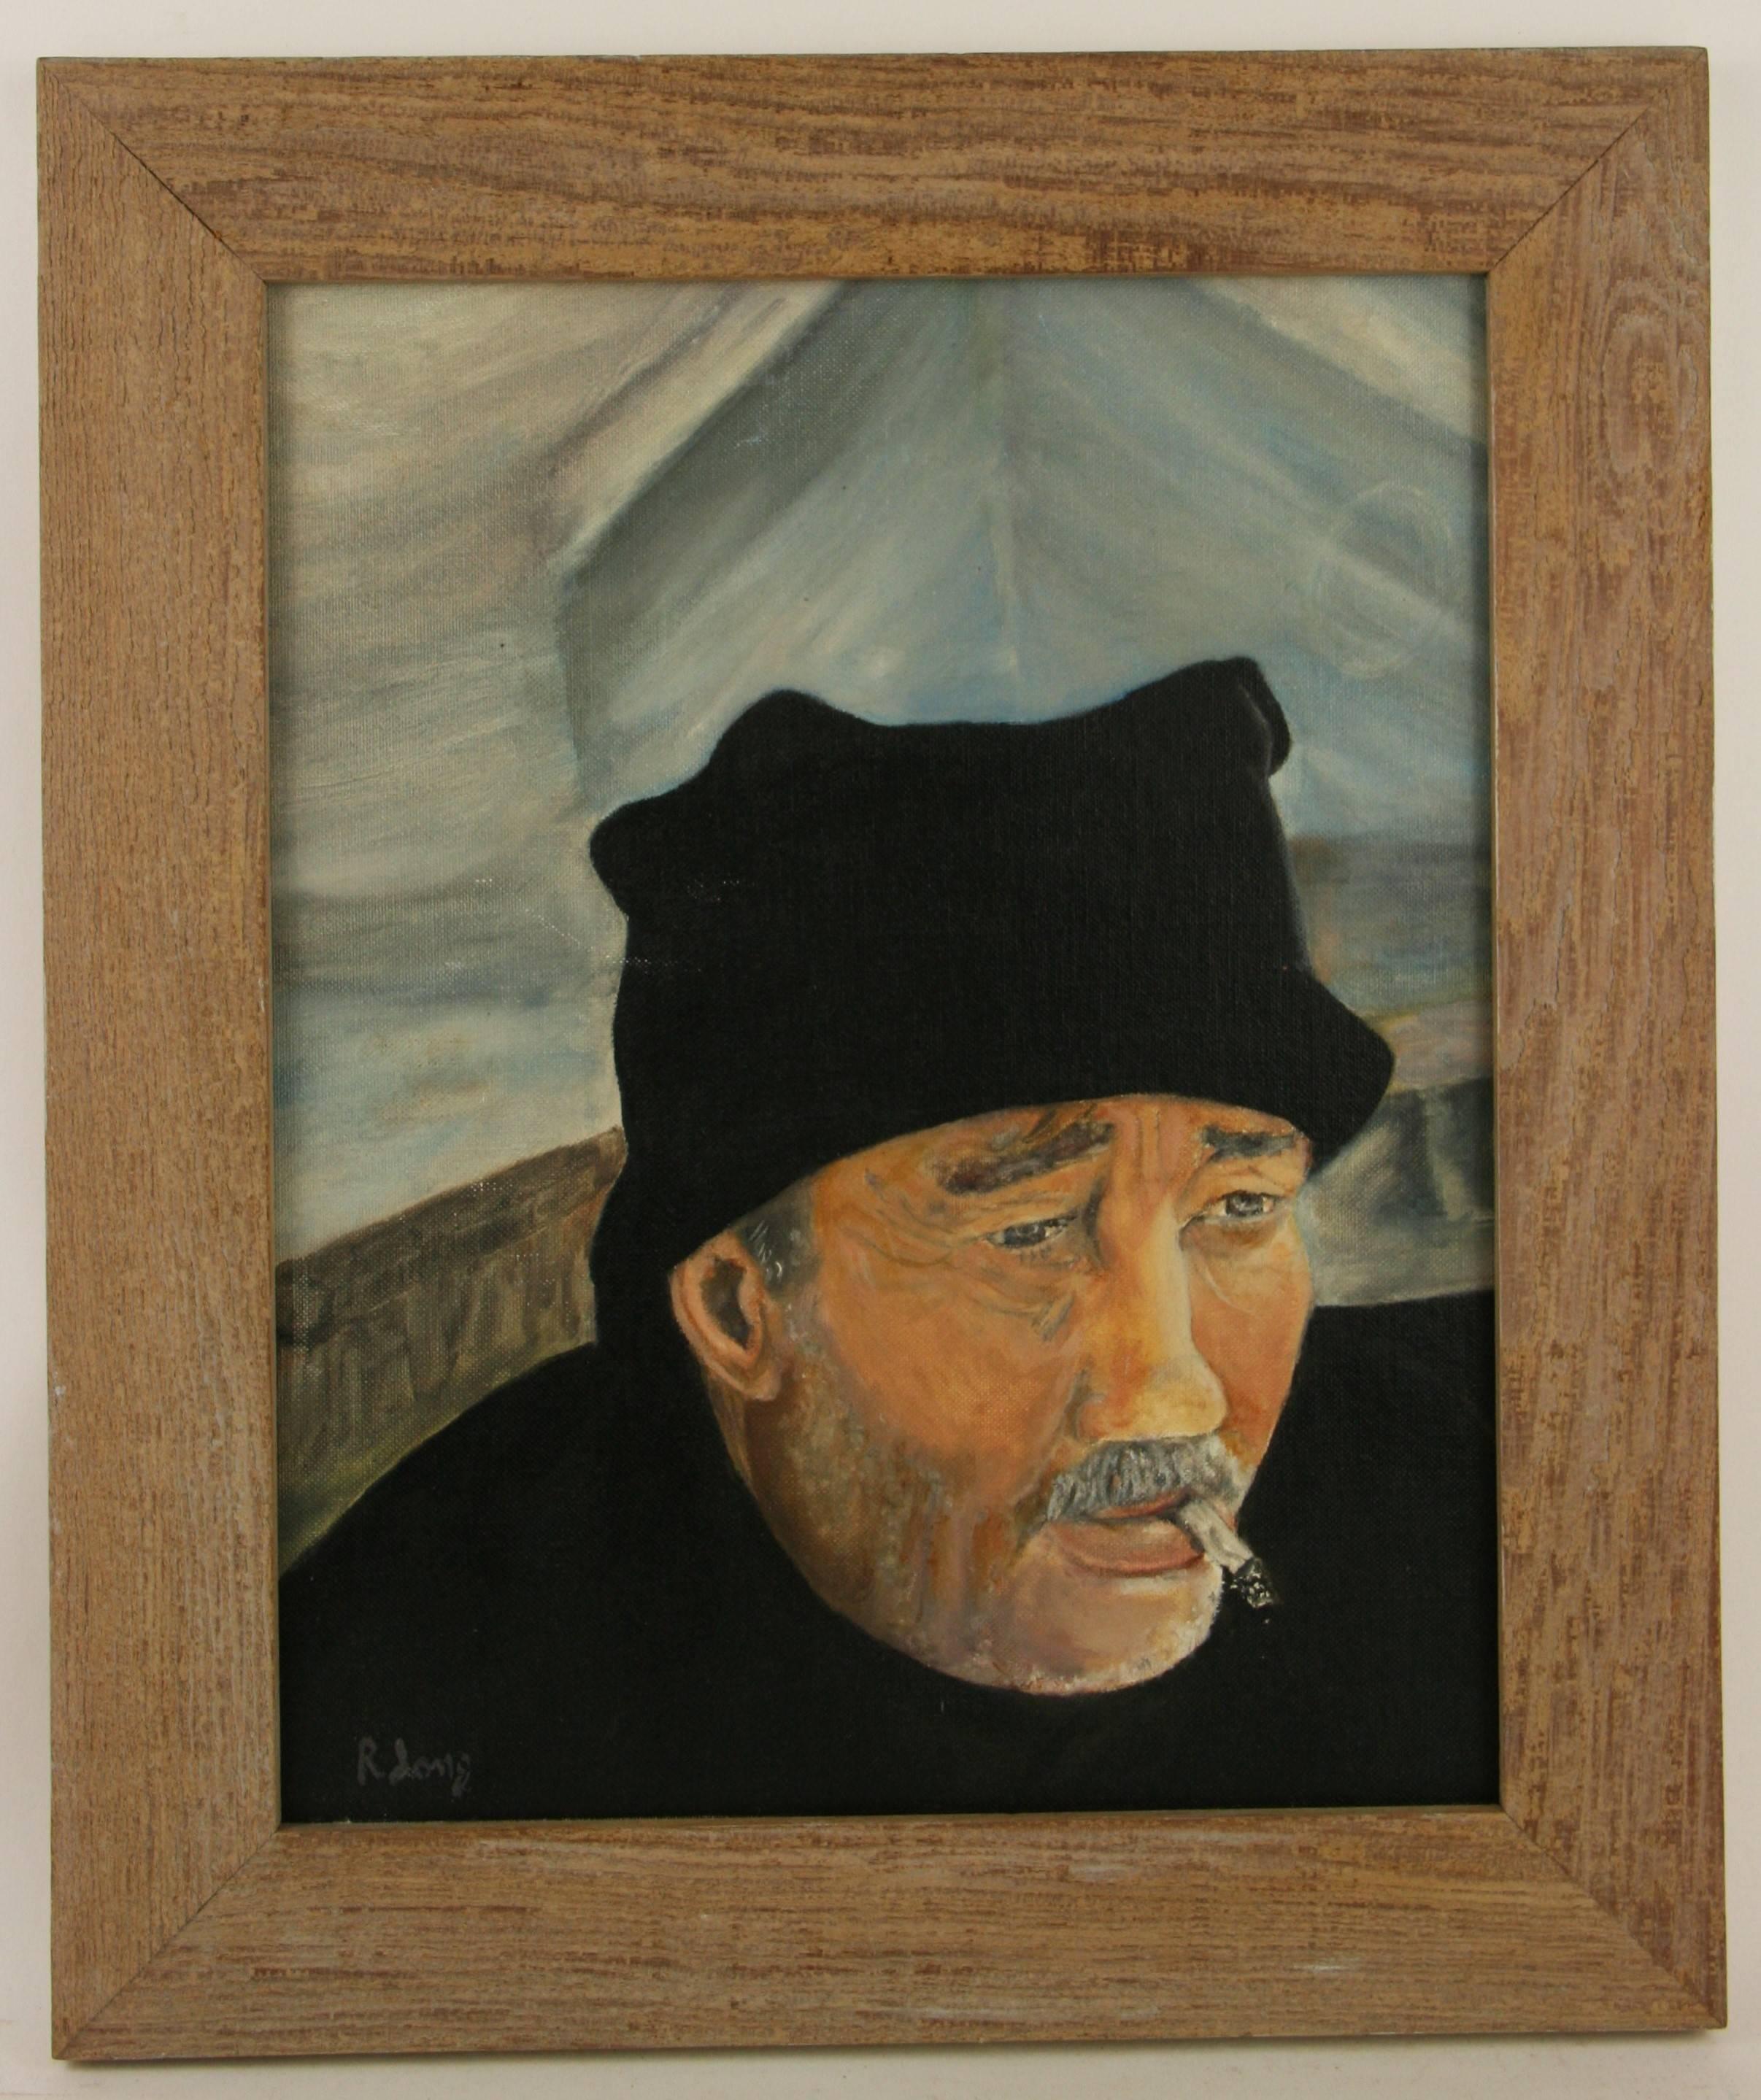 #5-2425 A sailors portrait,oil on artist board set in a natural wood frame.Signed lower left by R.Long